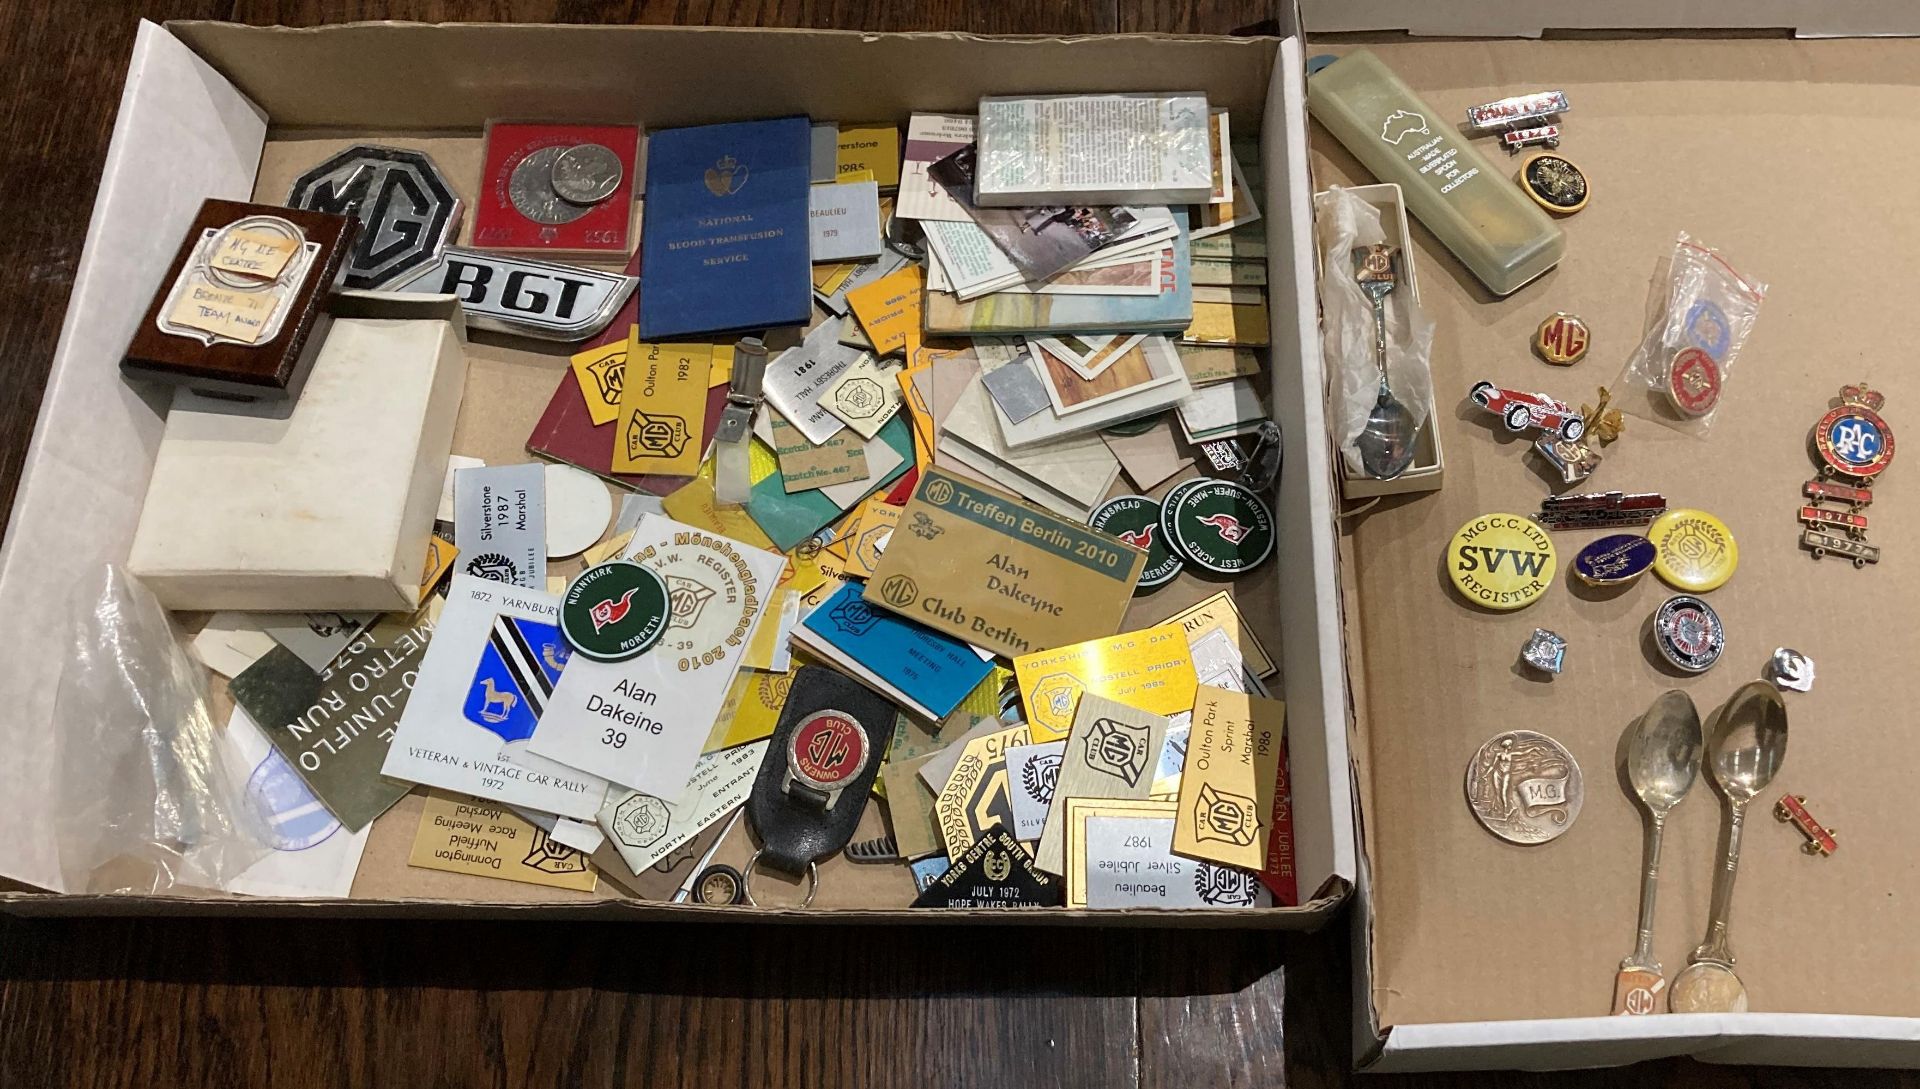 Contents to two trays - RAC Rally of Great Britain badge, quantity of MG and other badges,